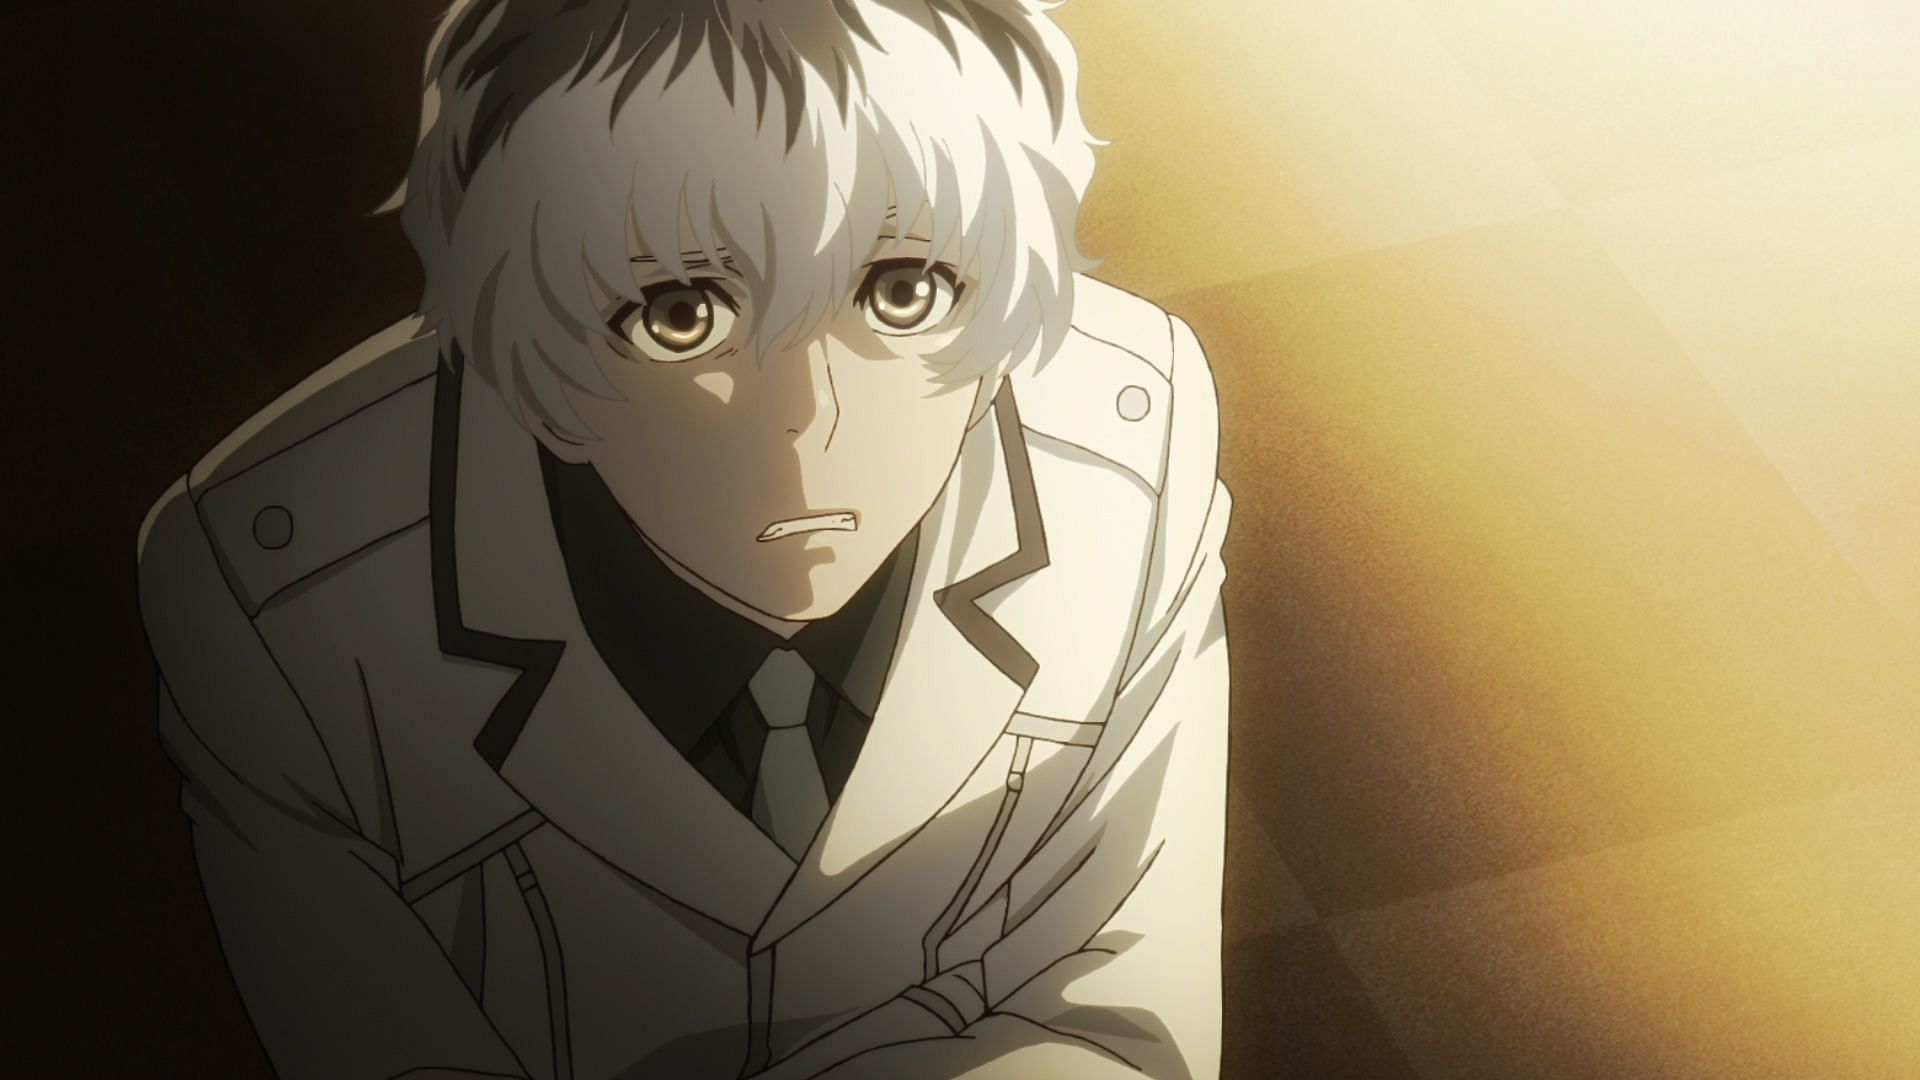 Tokyo Ghoul Fans Want Anime Reboot From Mappa And Ufotable